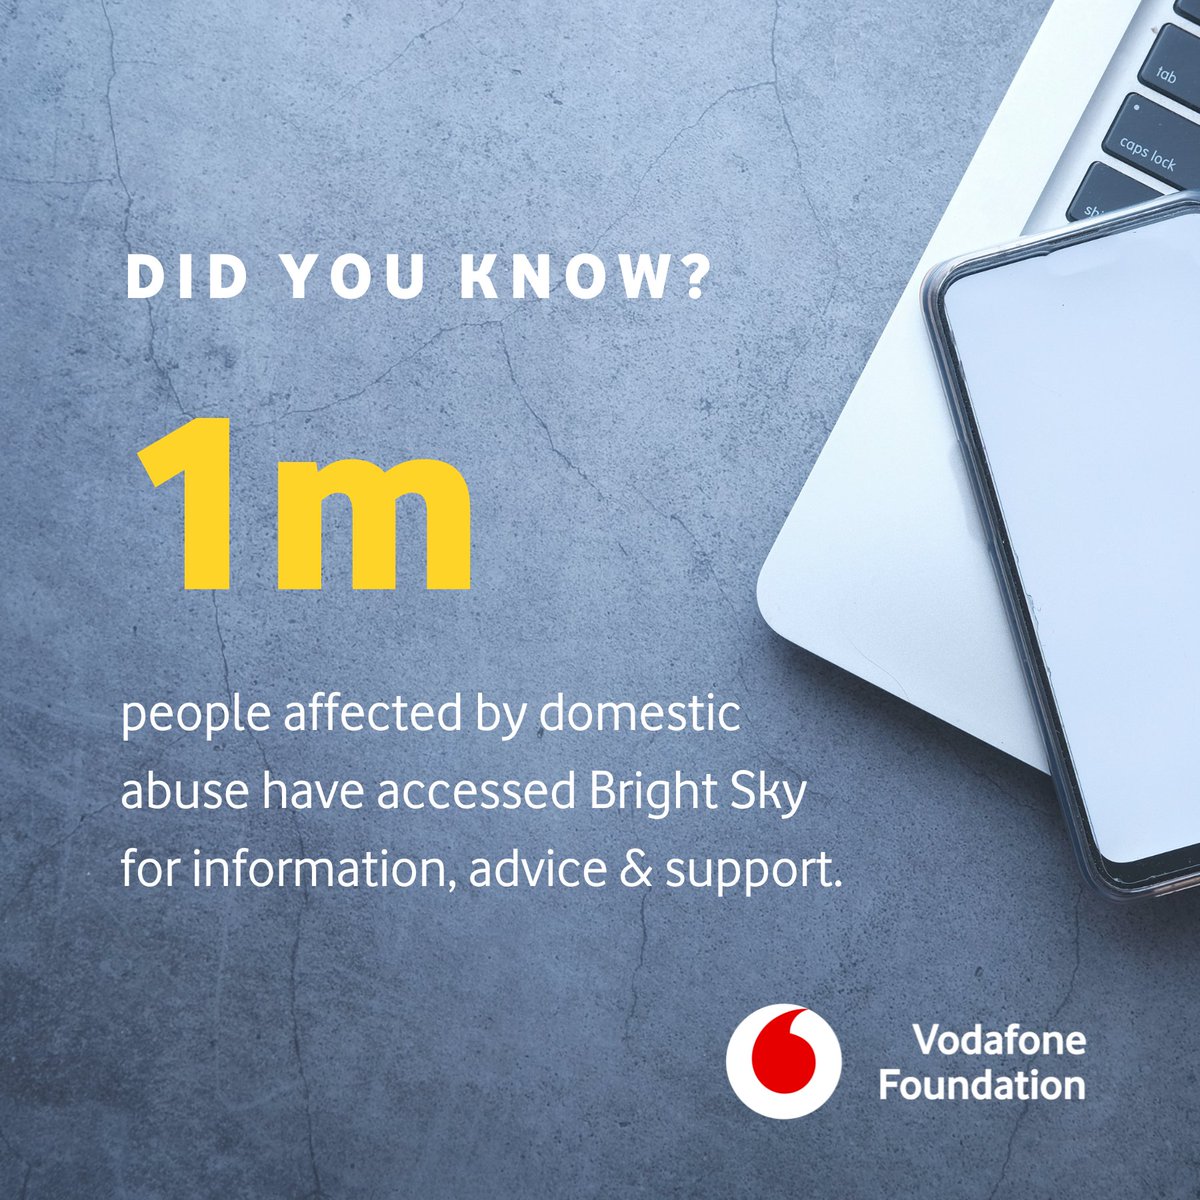 #BrightSky has reached a milestone moment, providing information, advice and support to over one million people affected by domestic abuse. Download the app for free via the App Store and Google Play. Find out more: vodafone.com/news/vodafone-… #VodafoneFoundation #DomesticAbuse